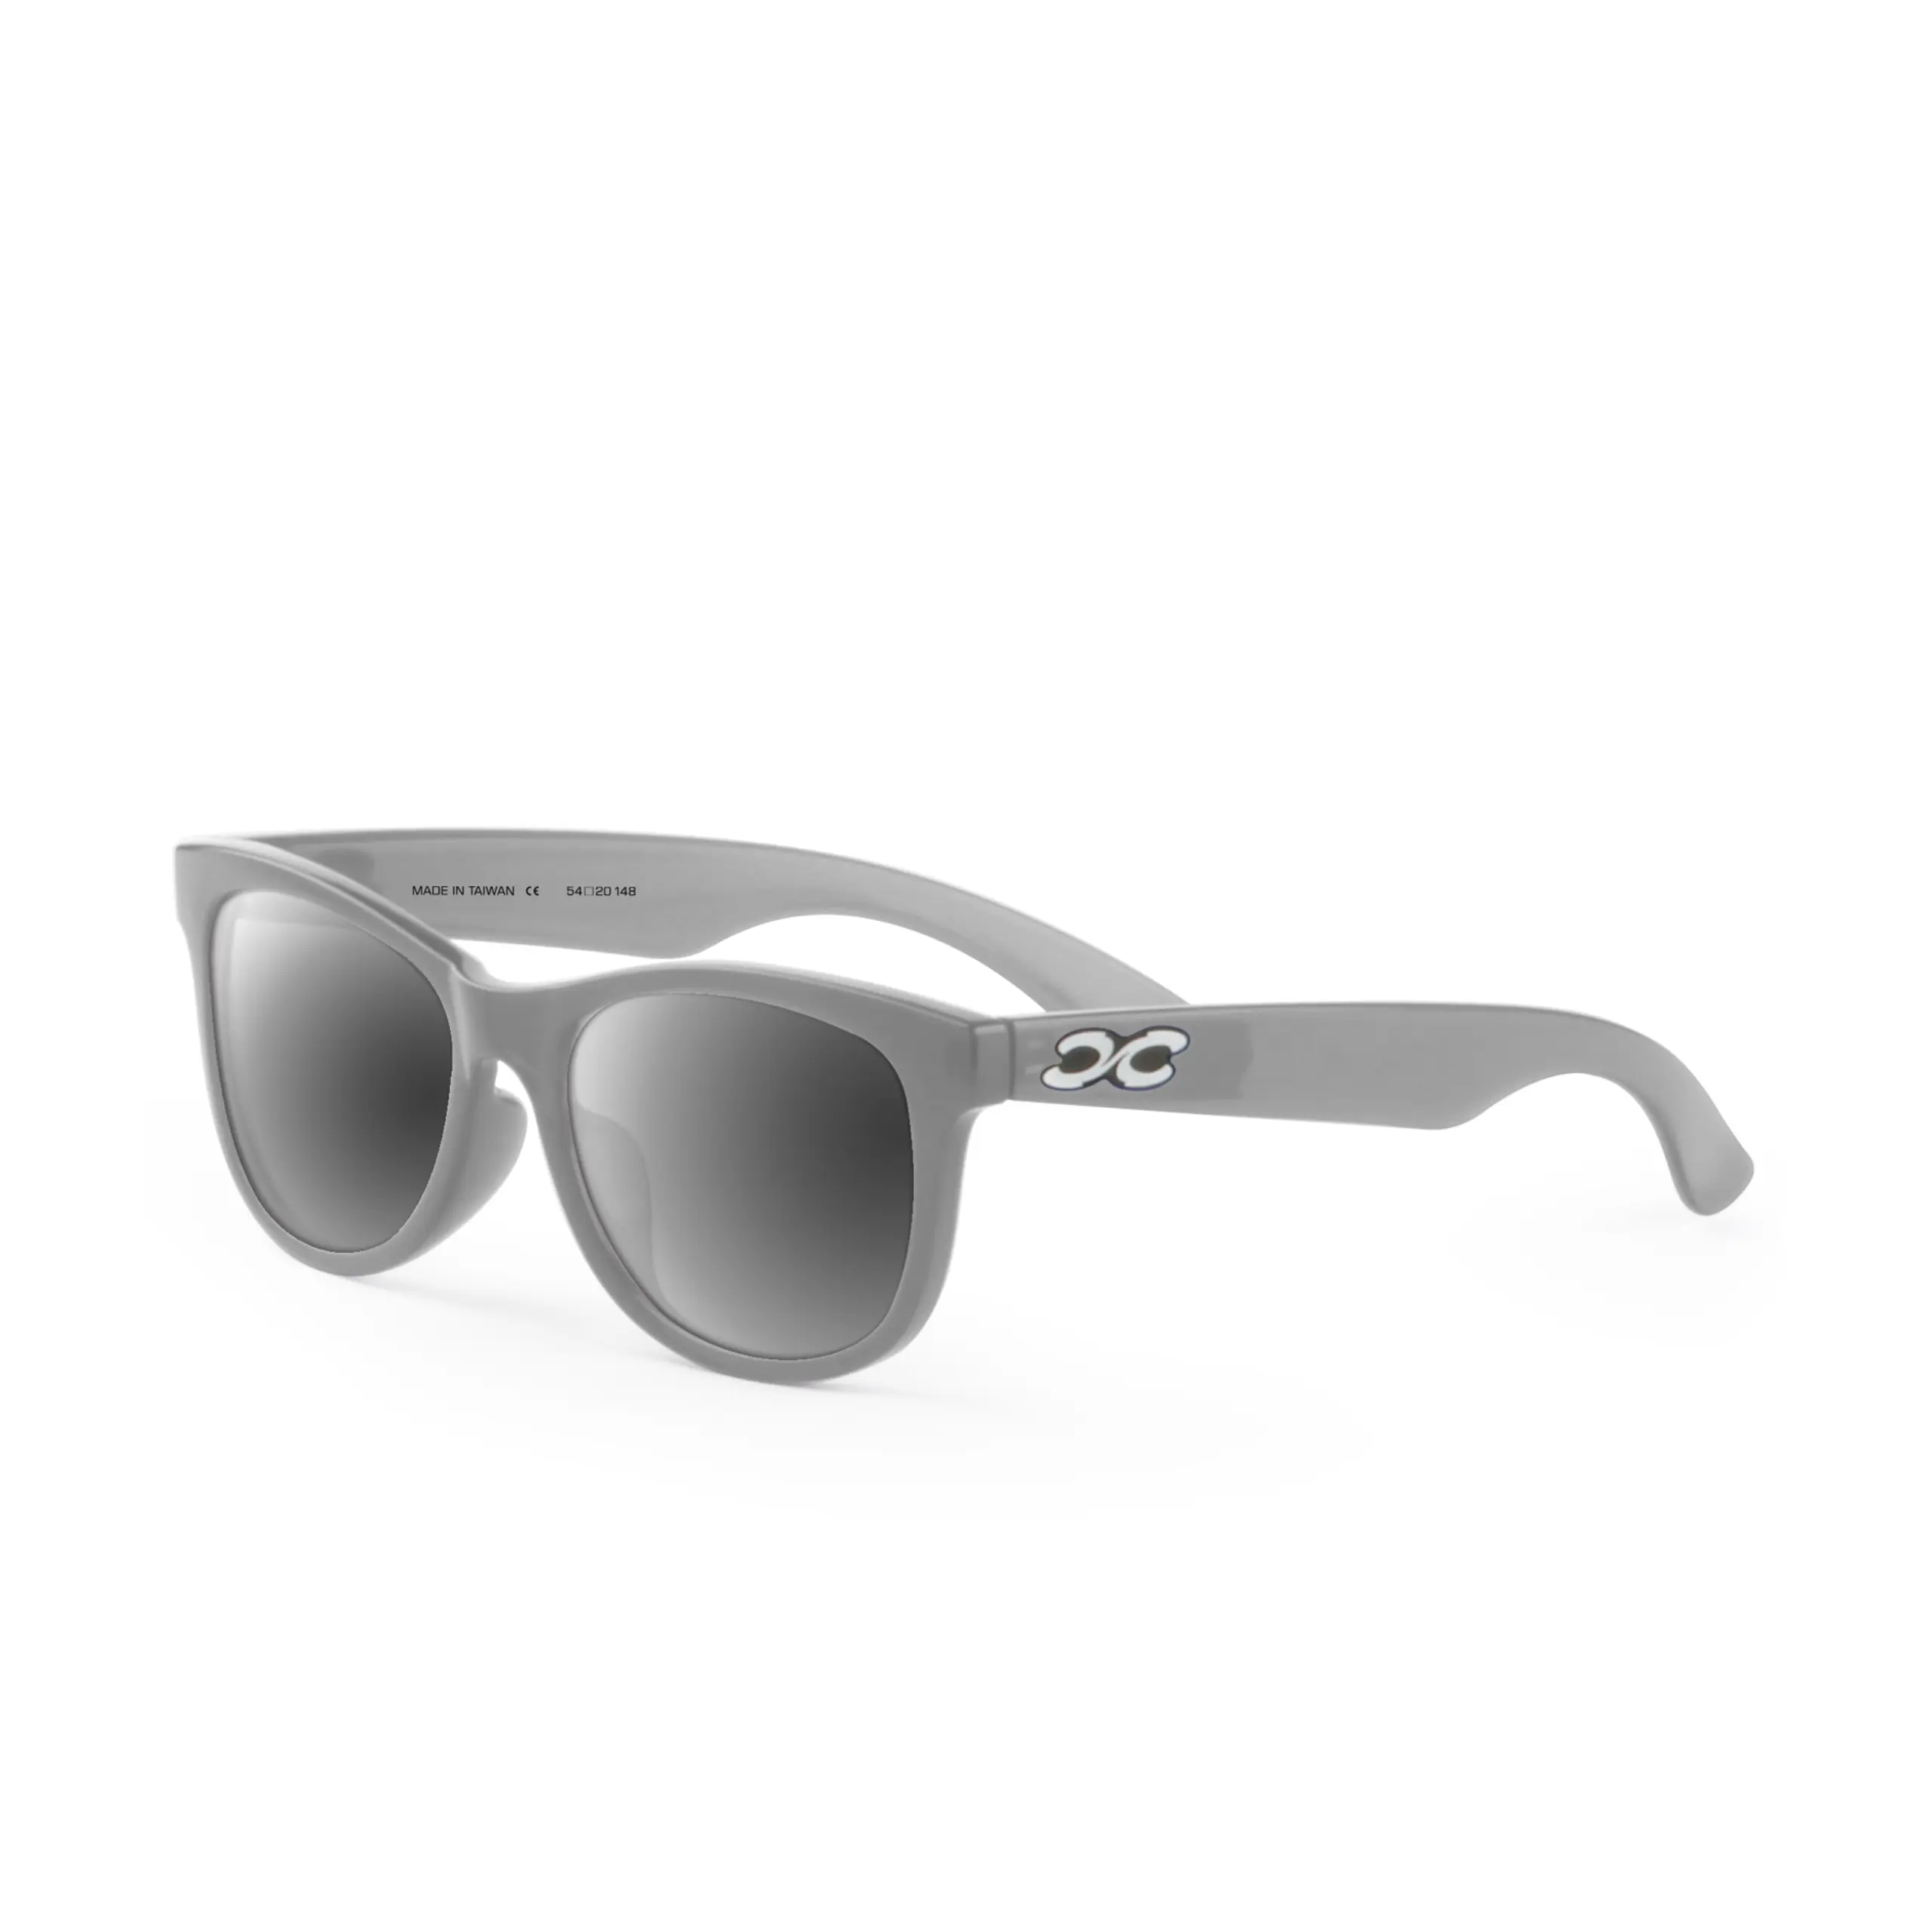 Hot Sale Trendy Muti-color Mr.X Lifestyle Sunglasses from reliable supplier